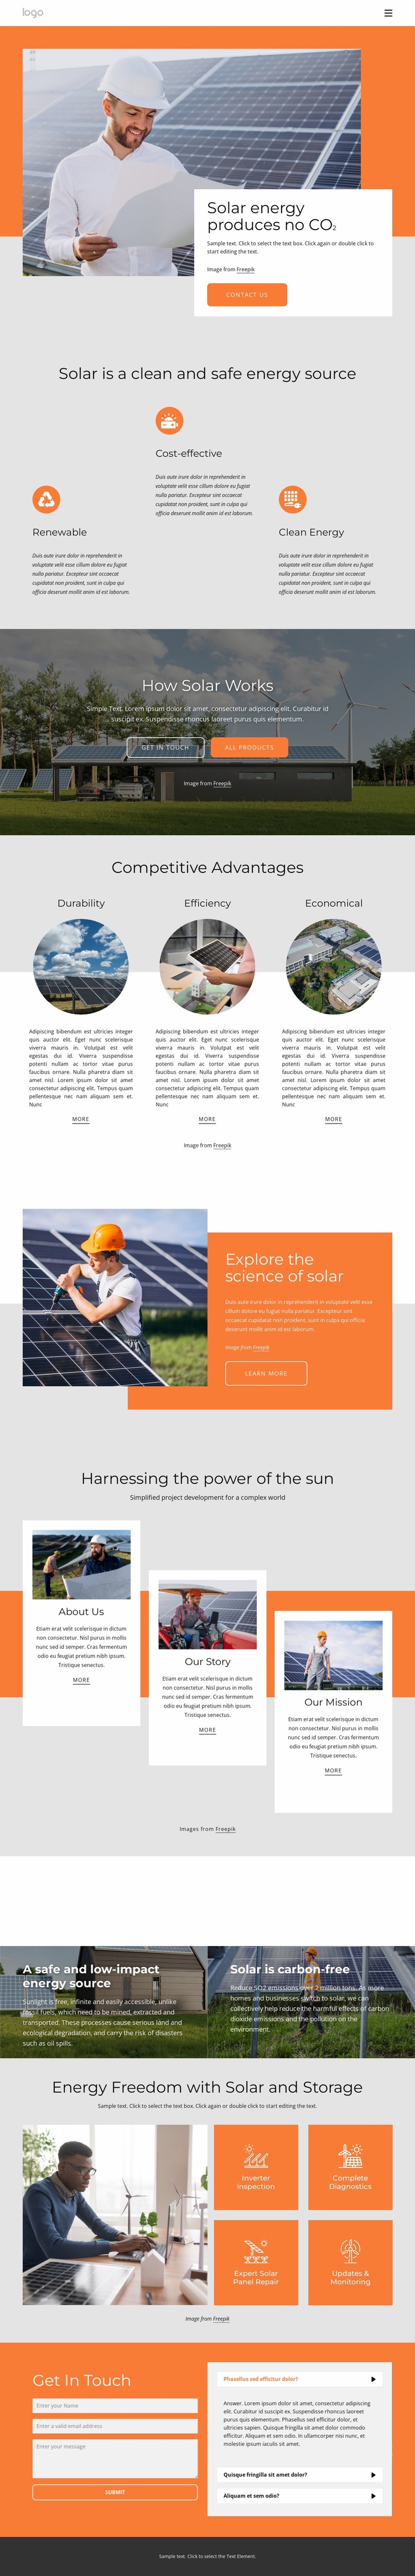 Power your home with clean solar energy Website Builder Templates